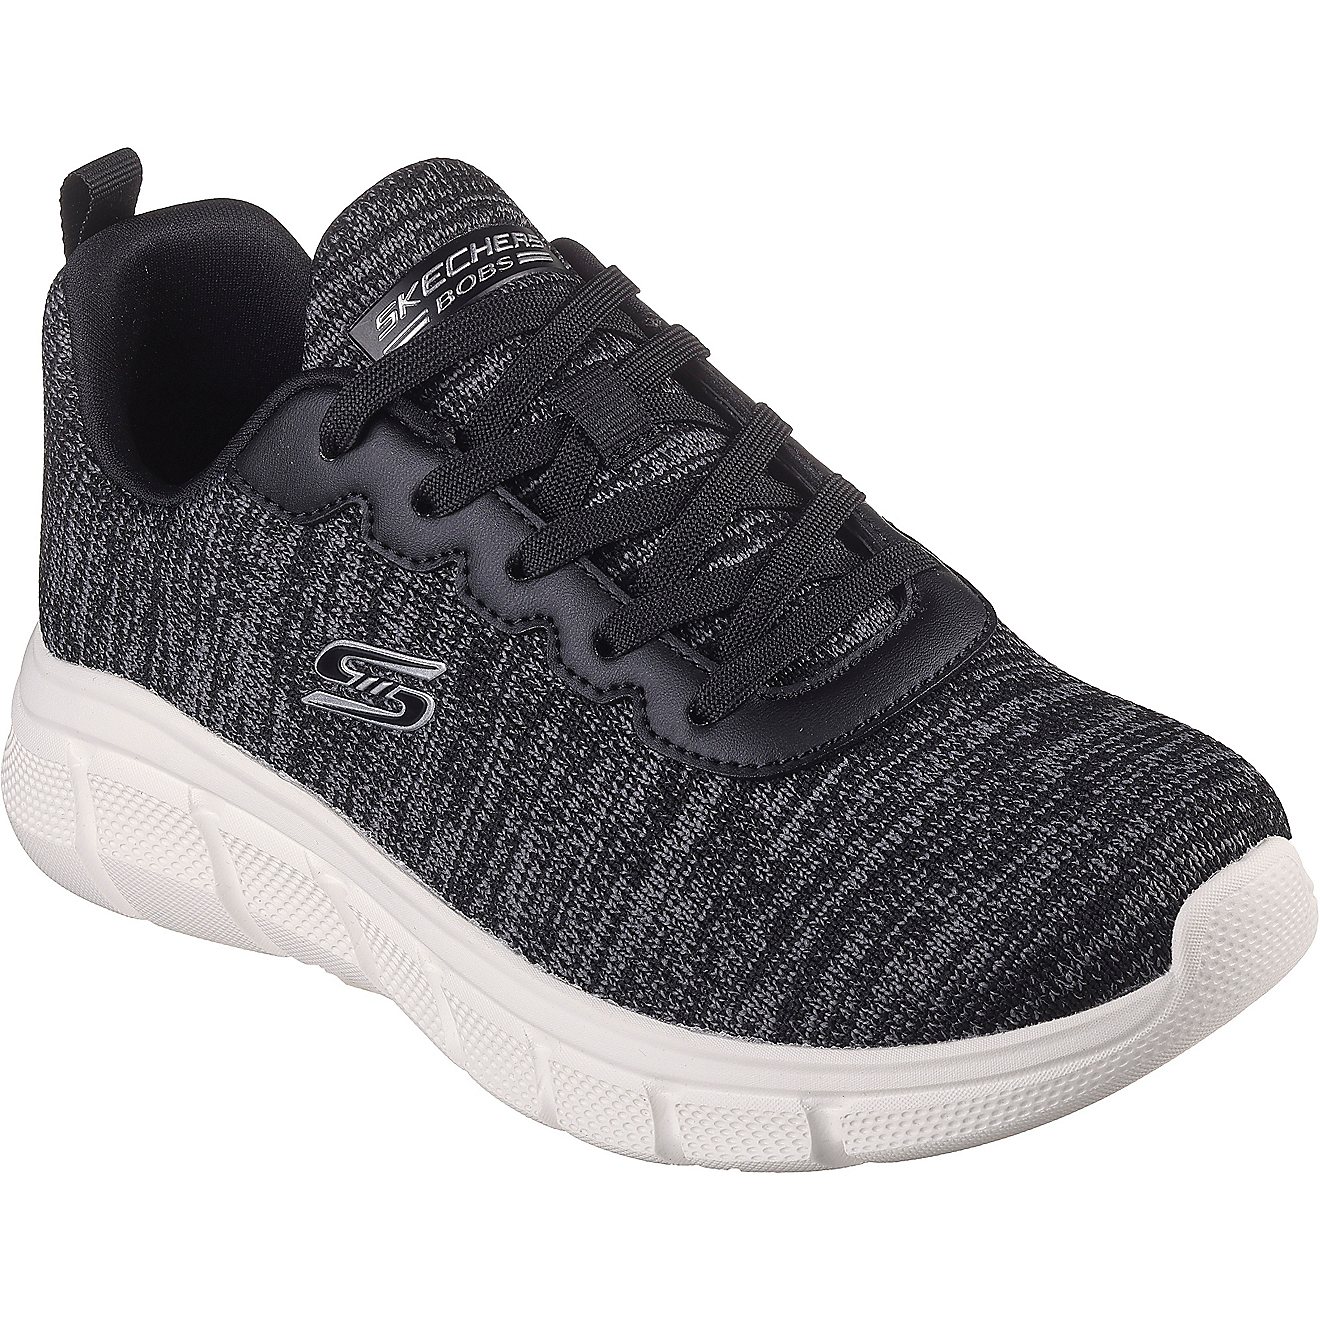 SKECHERS Women's Bobs B Flex Shoes | Free Shipping at Academy